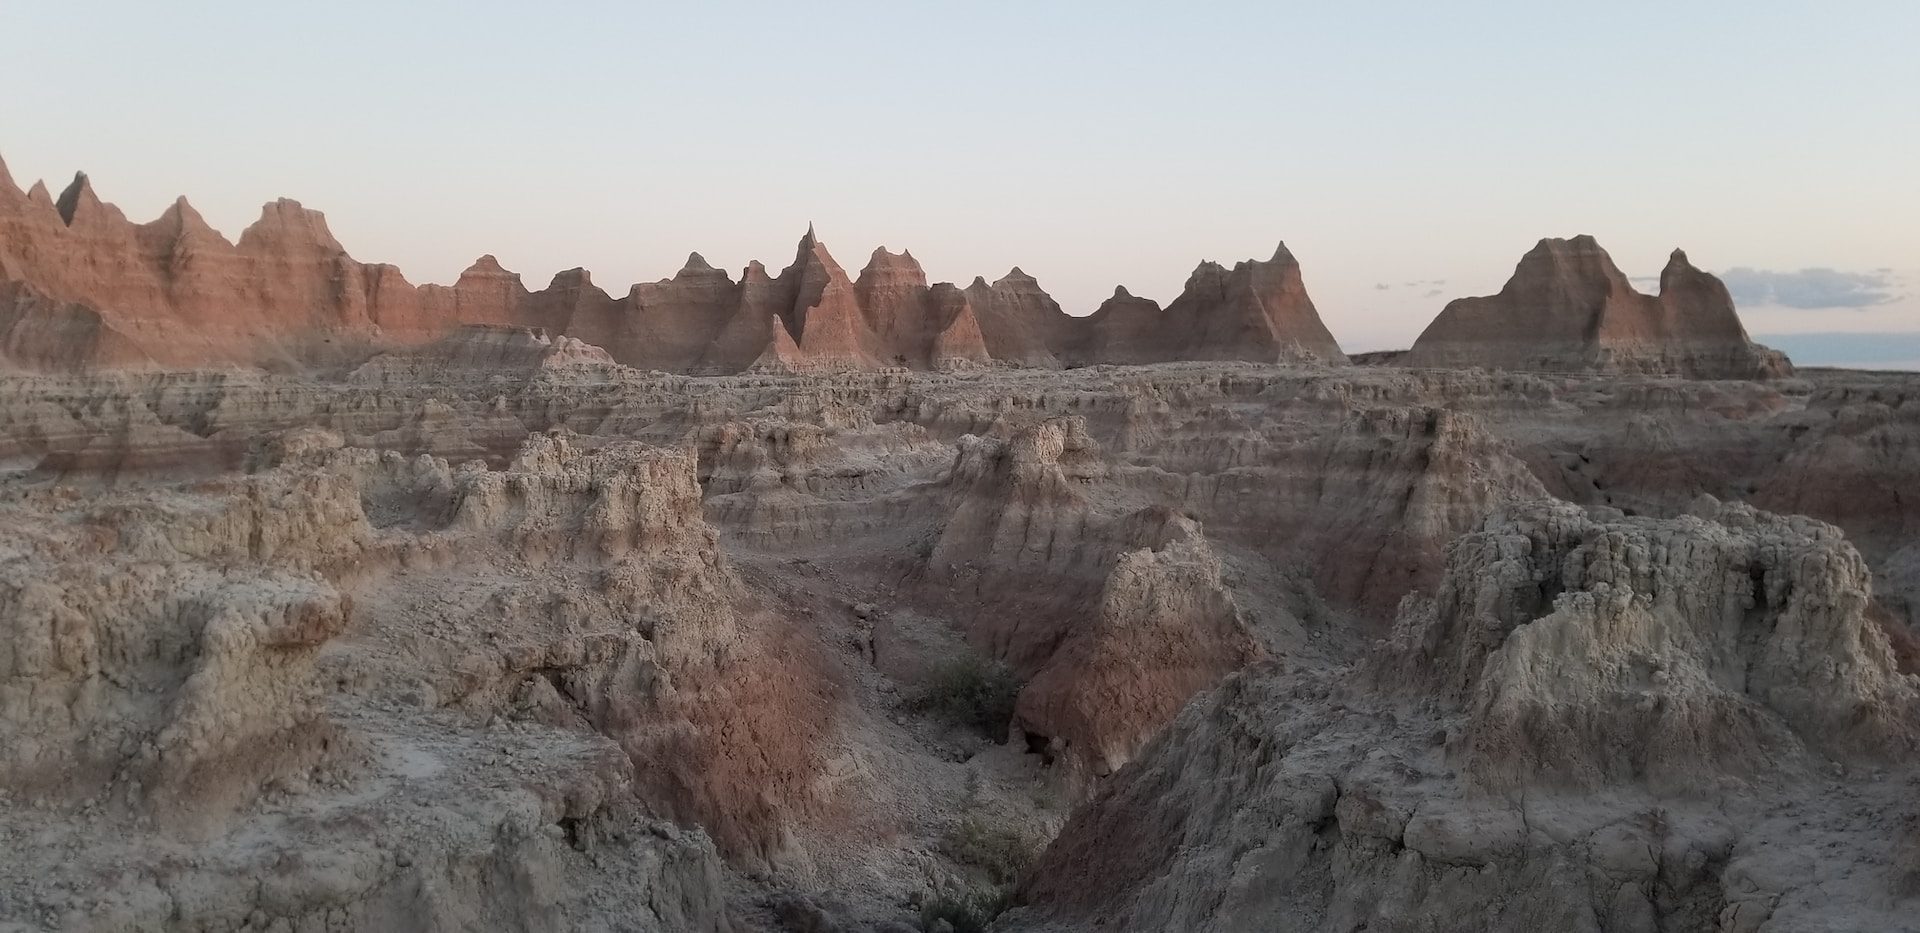 Large group of rock formations in the desert near Sioux Falls, South Dakota.